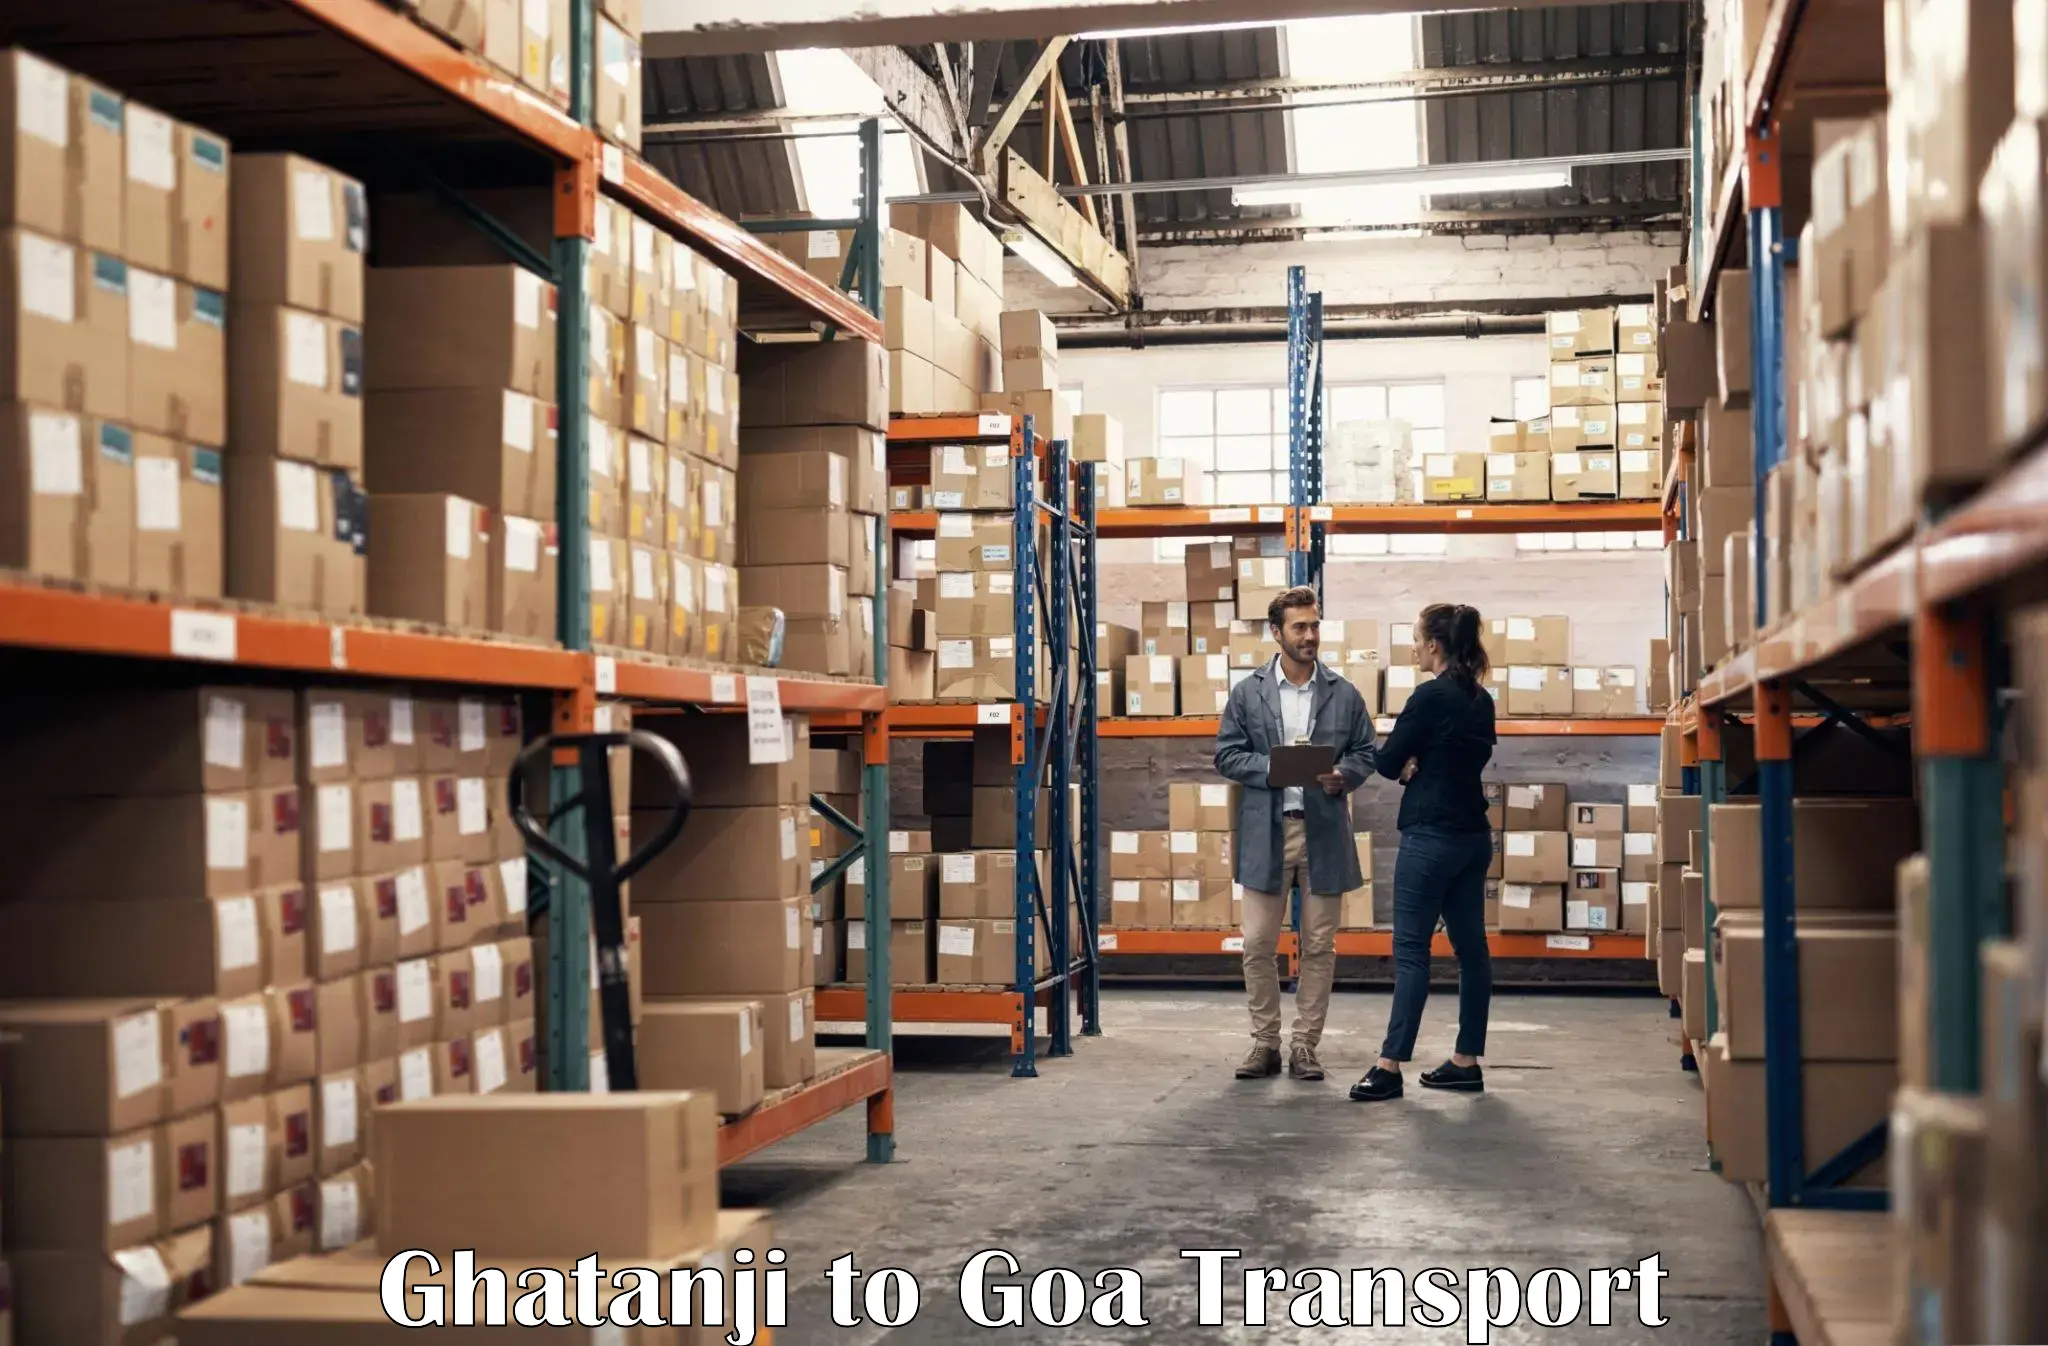 Truck transport companies in India Ghatanji to South Goa